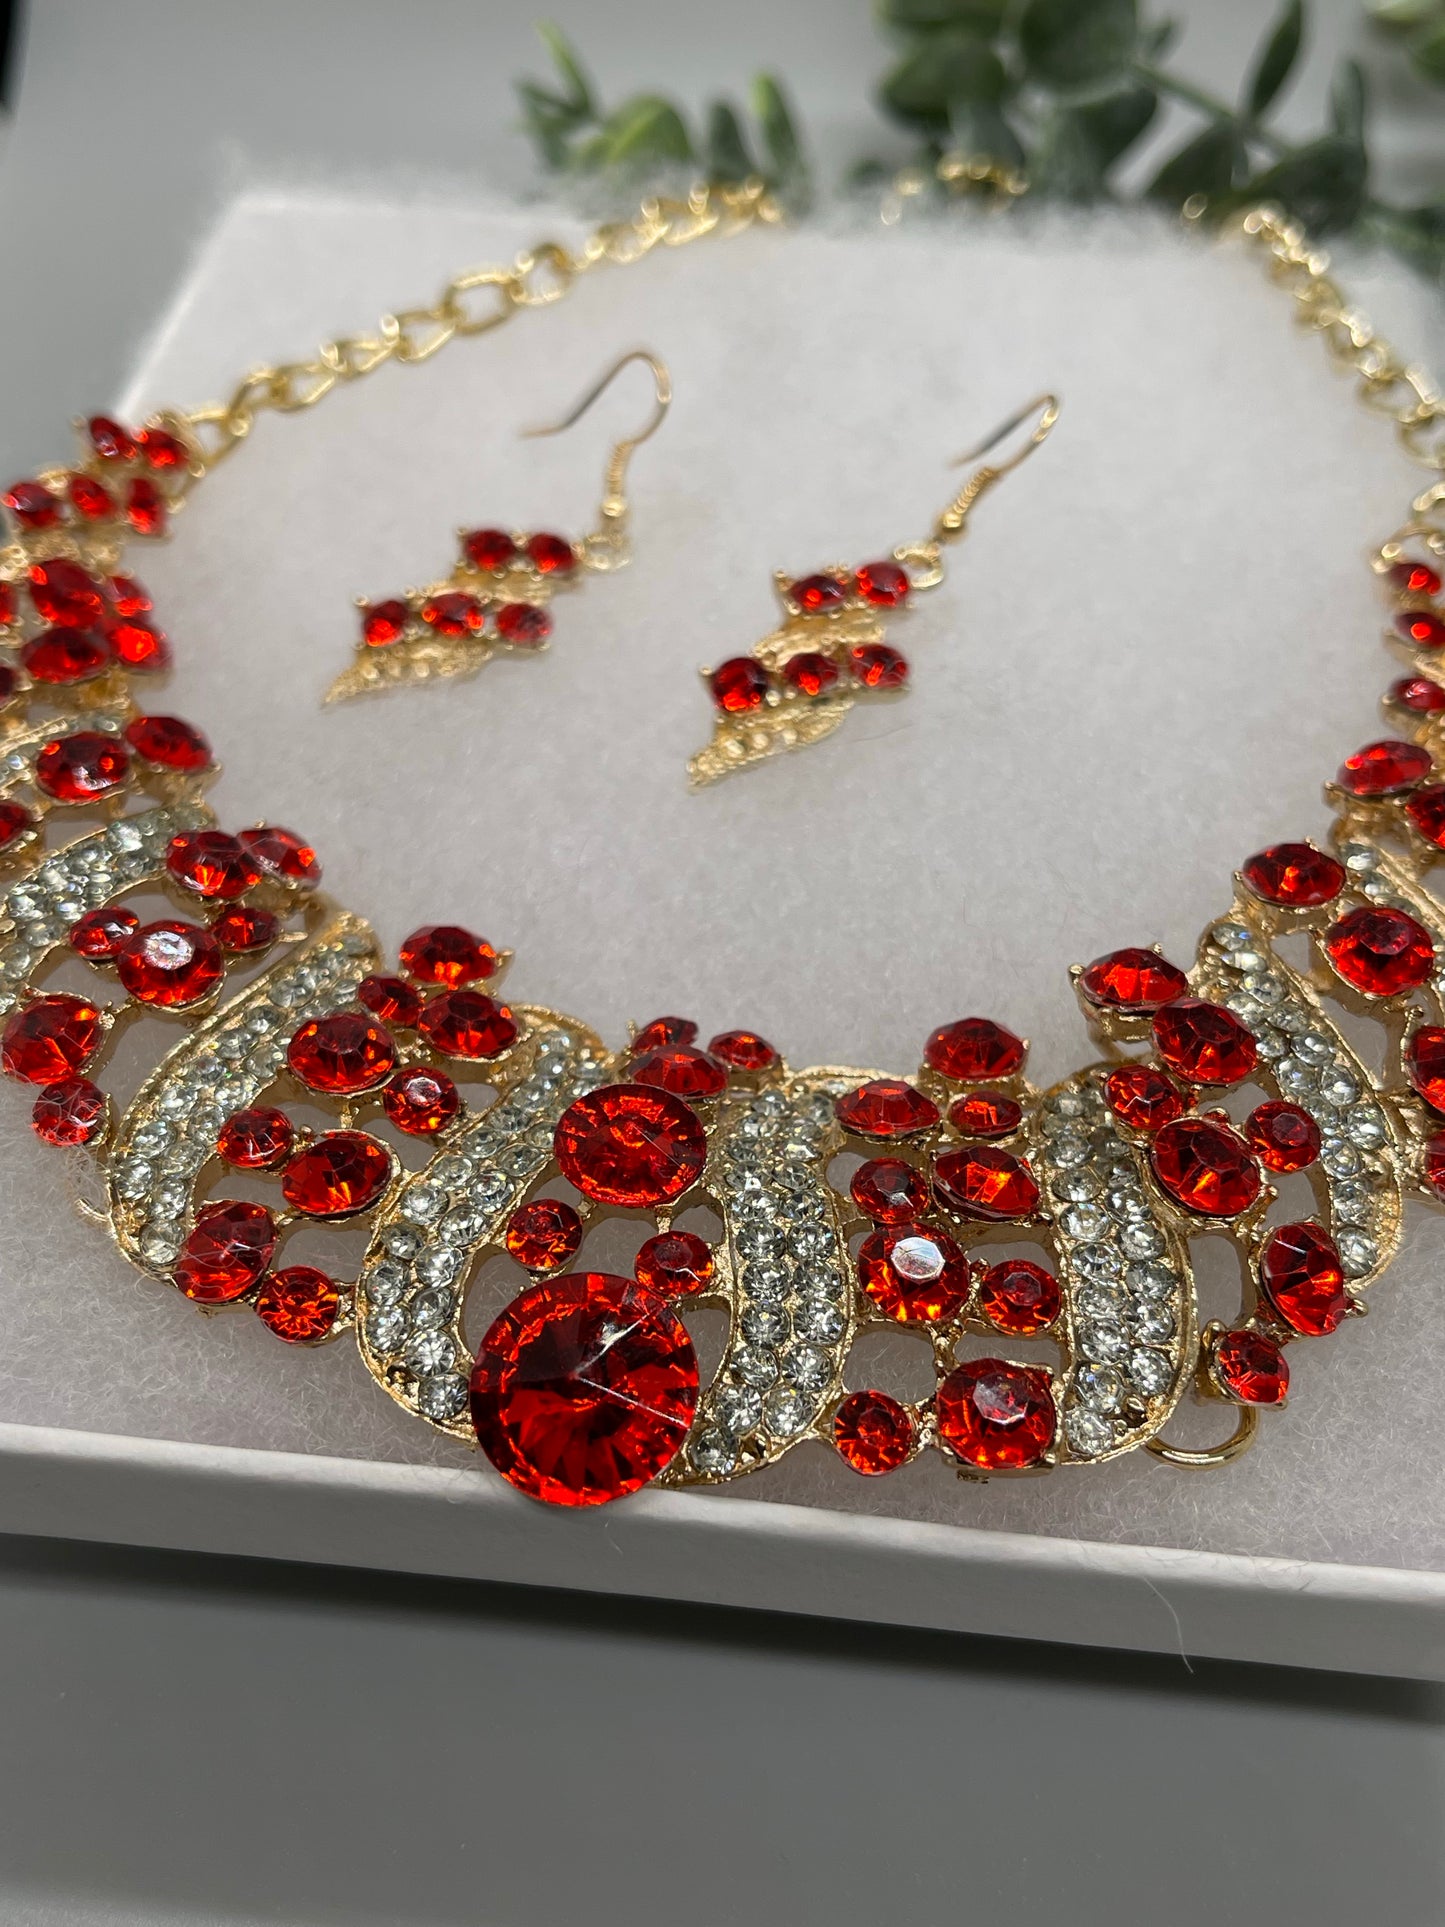 Red Gold Crystal rhinestone necklace earrings set wedding engagement formal accessory